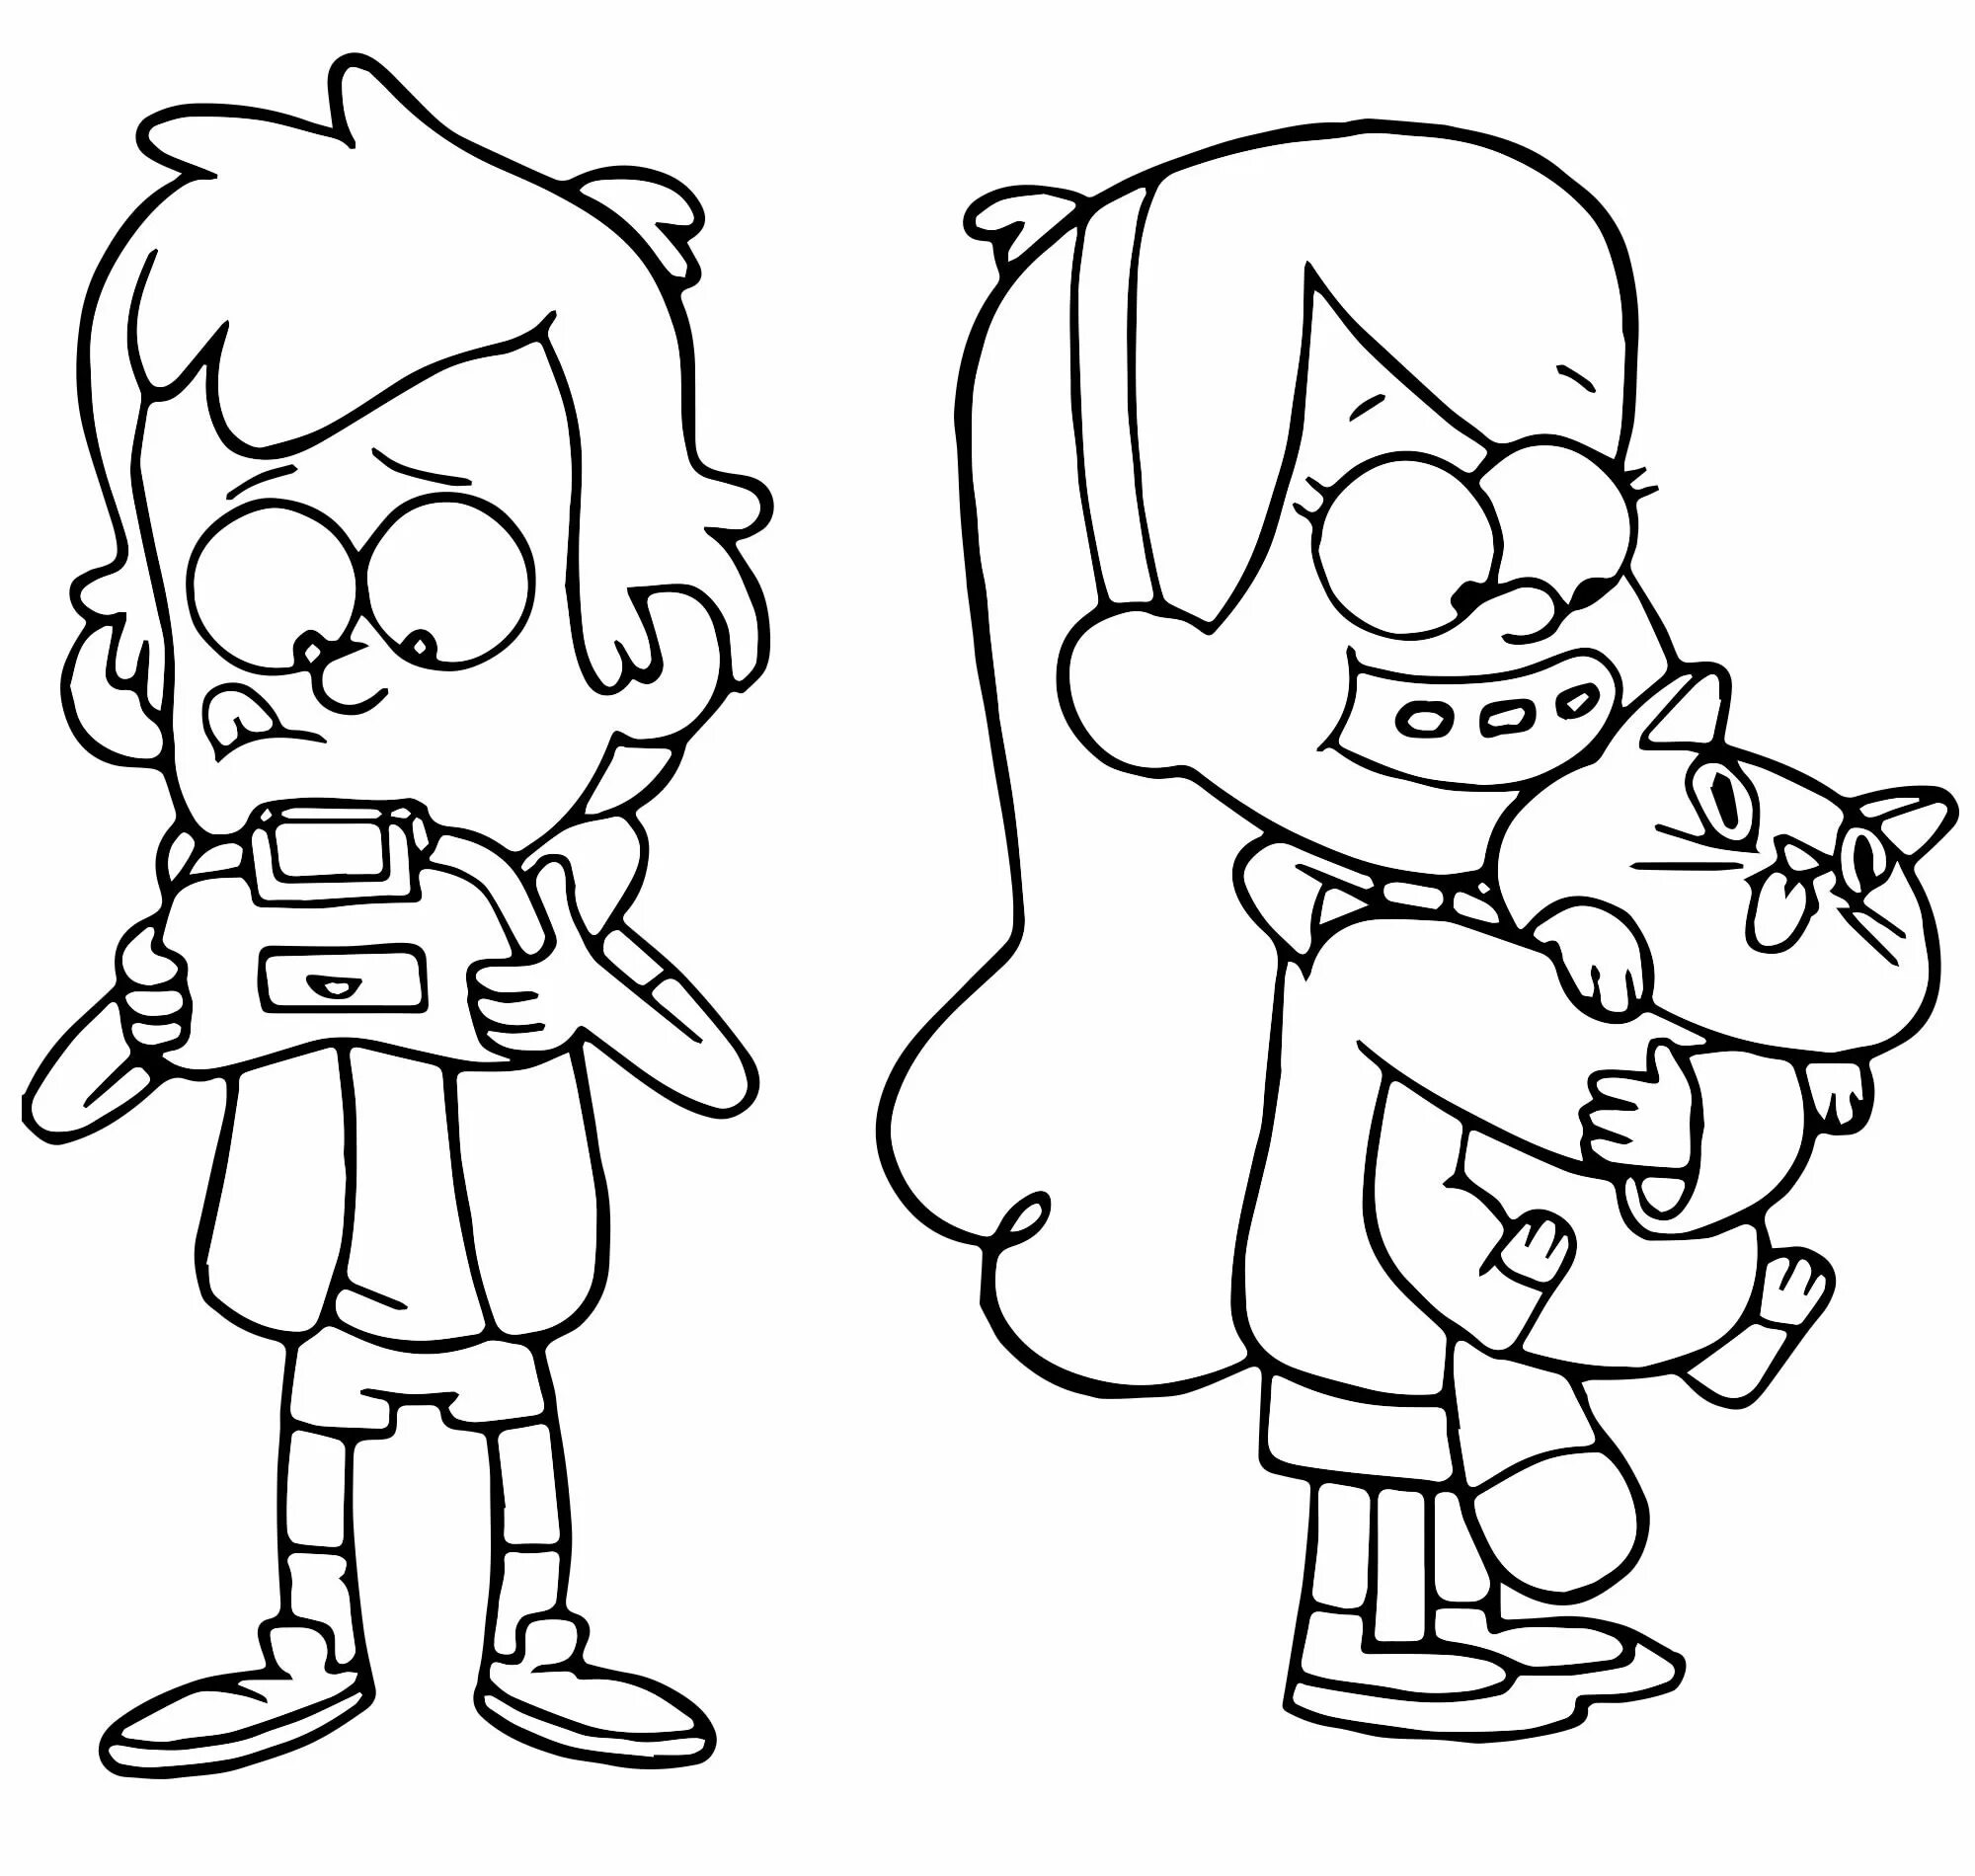 Radiant dipper and mabel coloring page